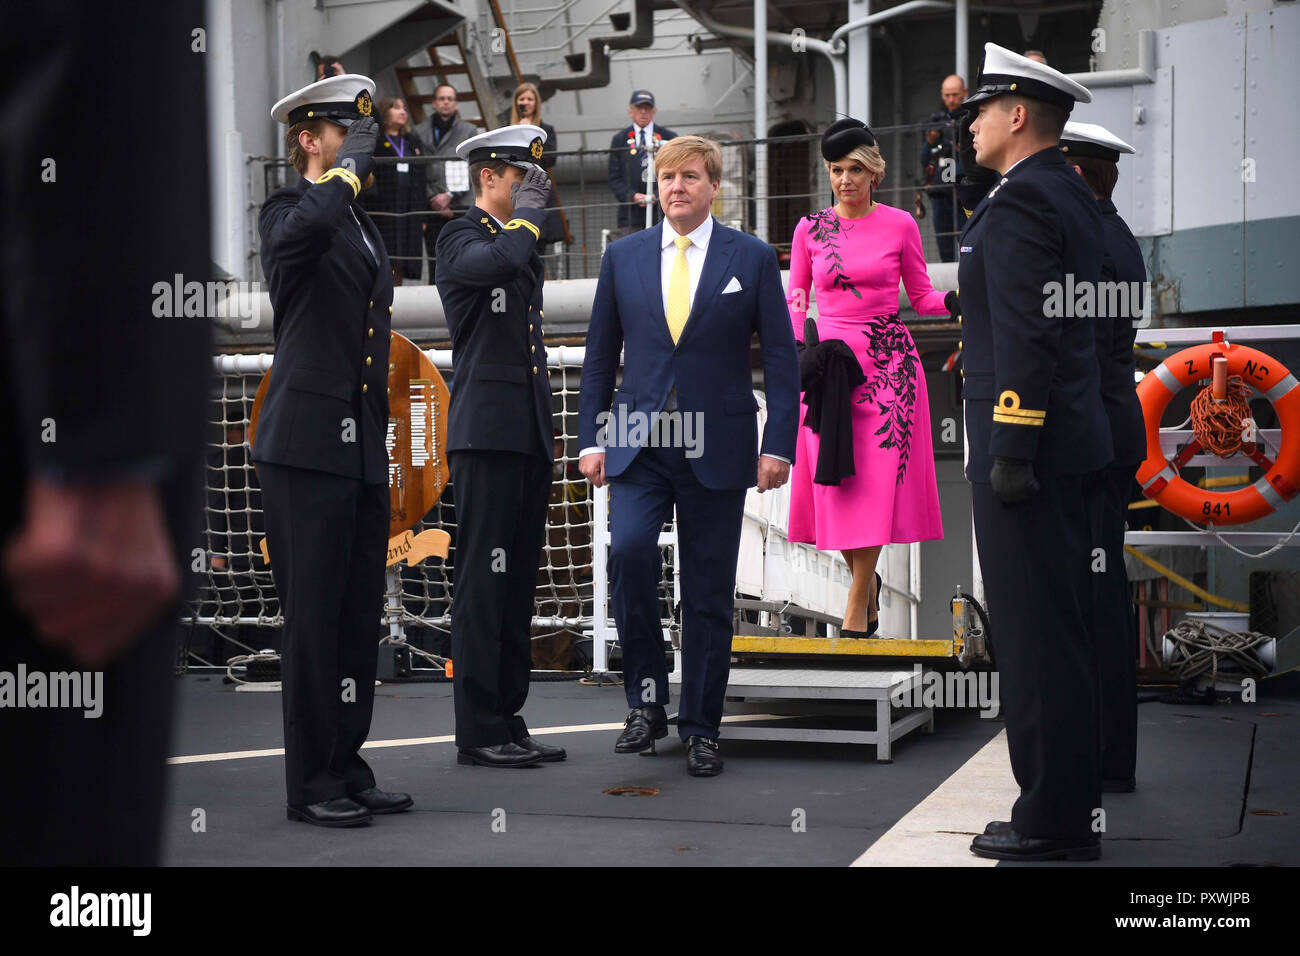 King Willem-Alexander and Queen Maxima of the Netherlands on HMS Belfast in London during an on-the-water capability demonstration between the Royal Netherlands Marine Corps and the Royal Marines. Stock Photo